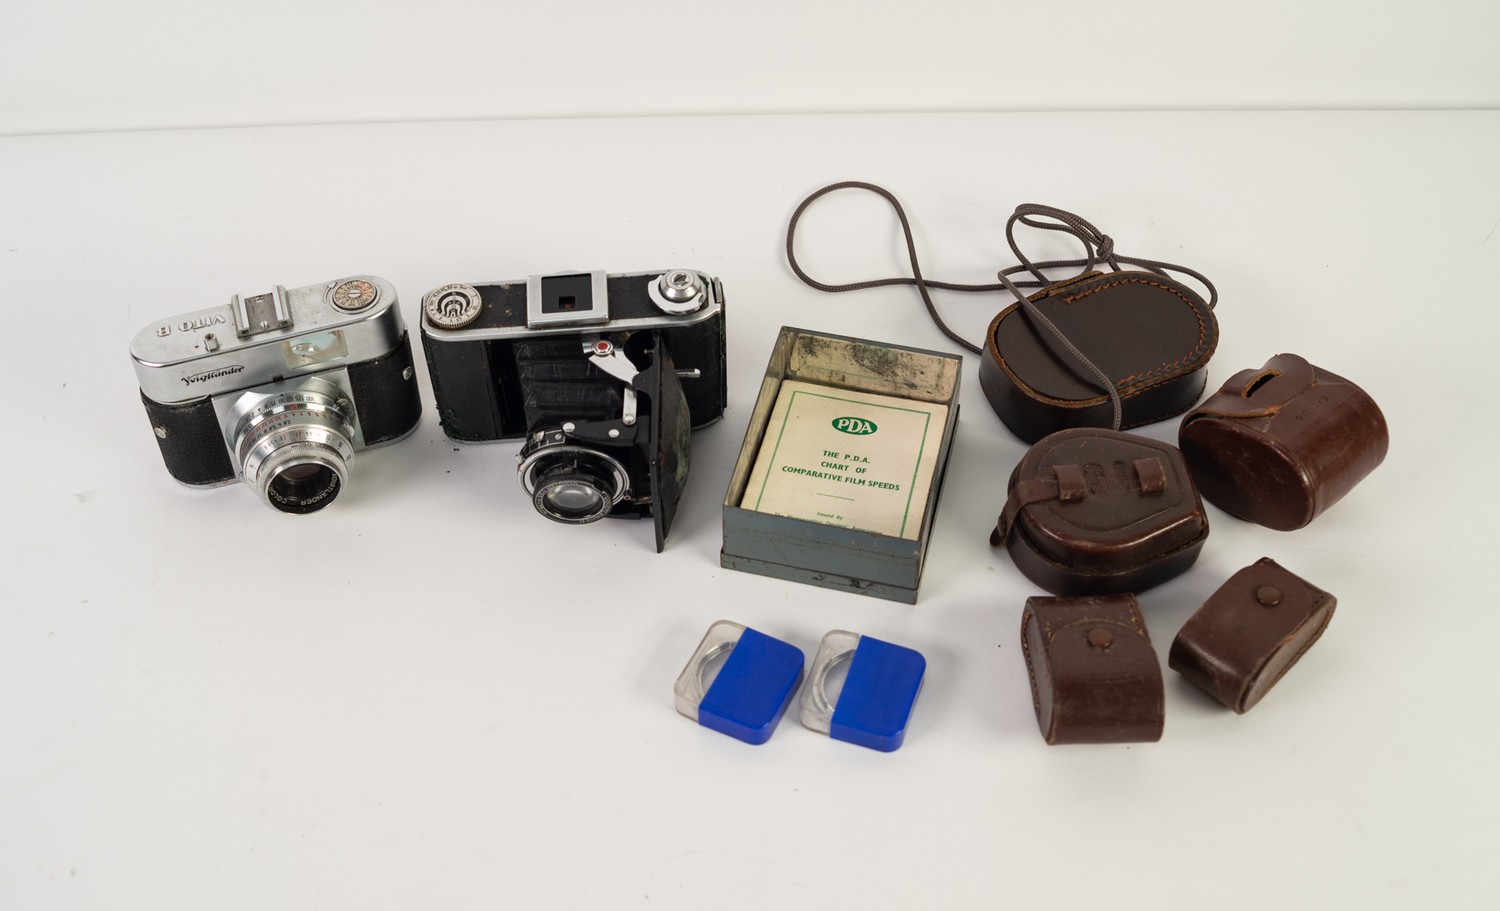 VOIGTLANDER VITO B S.L.R. CAMERA with accessories, including a range finder and Proxirect range